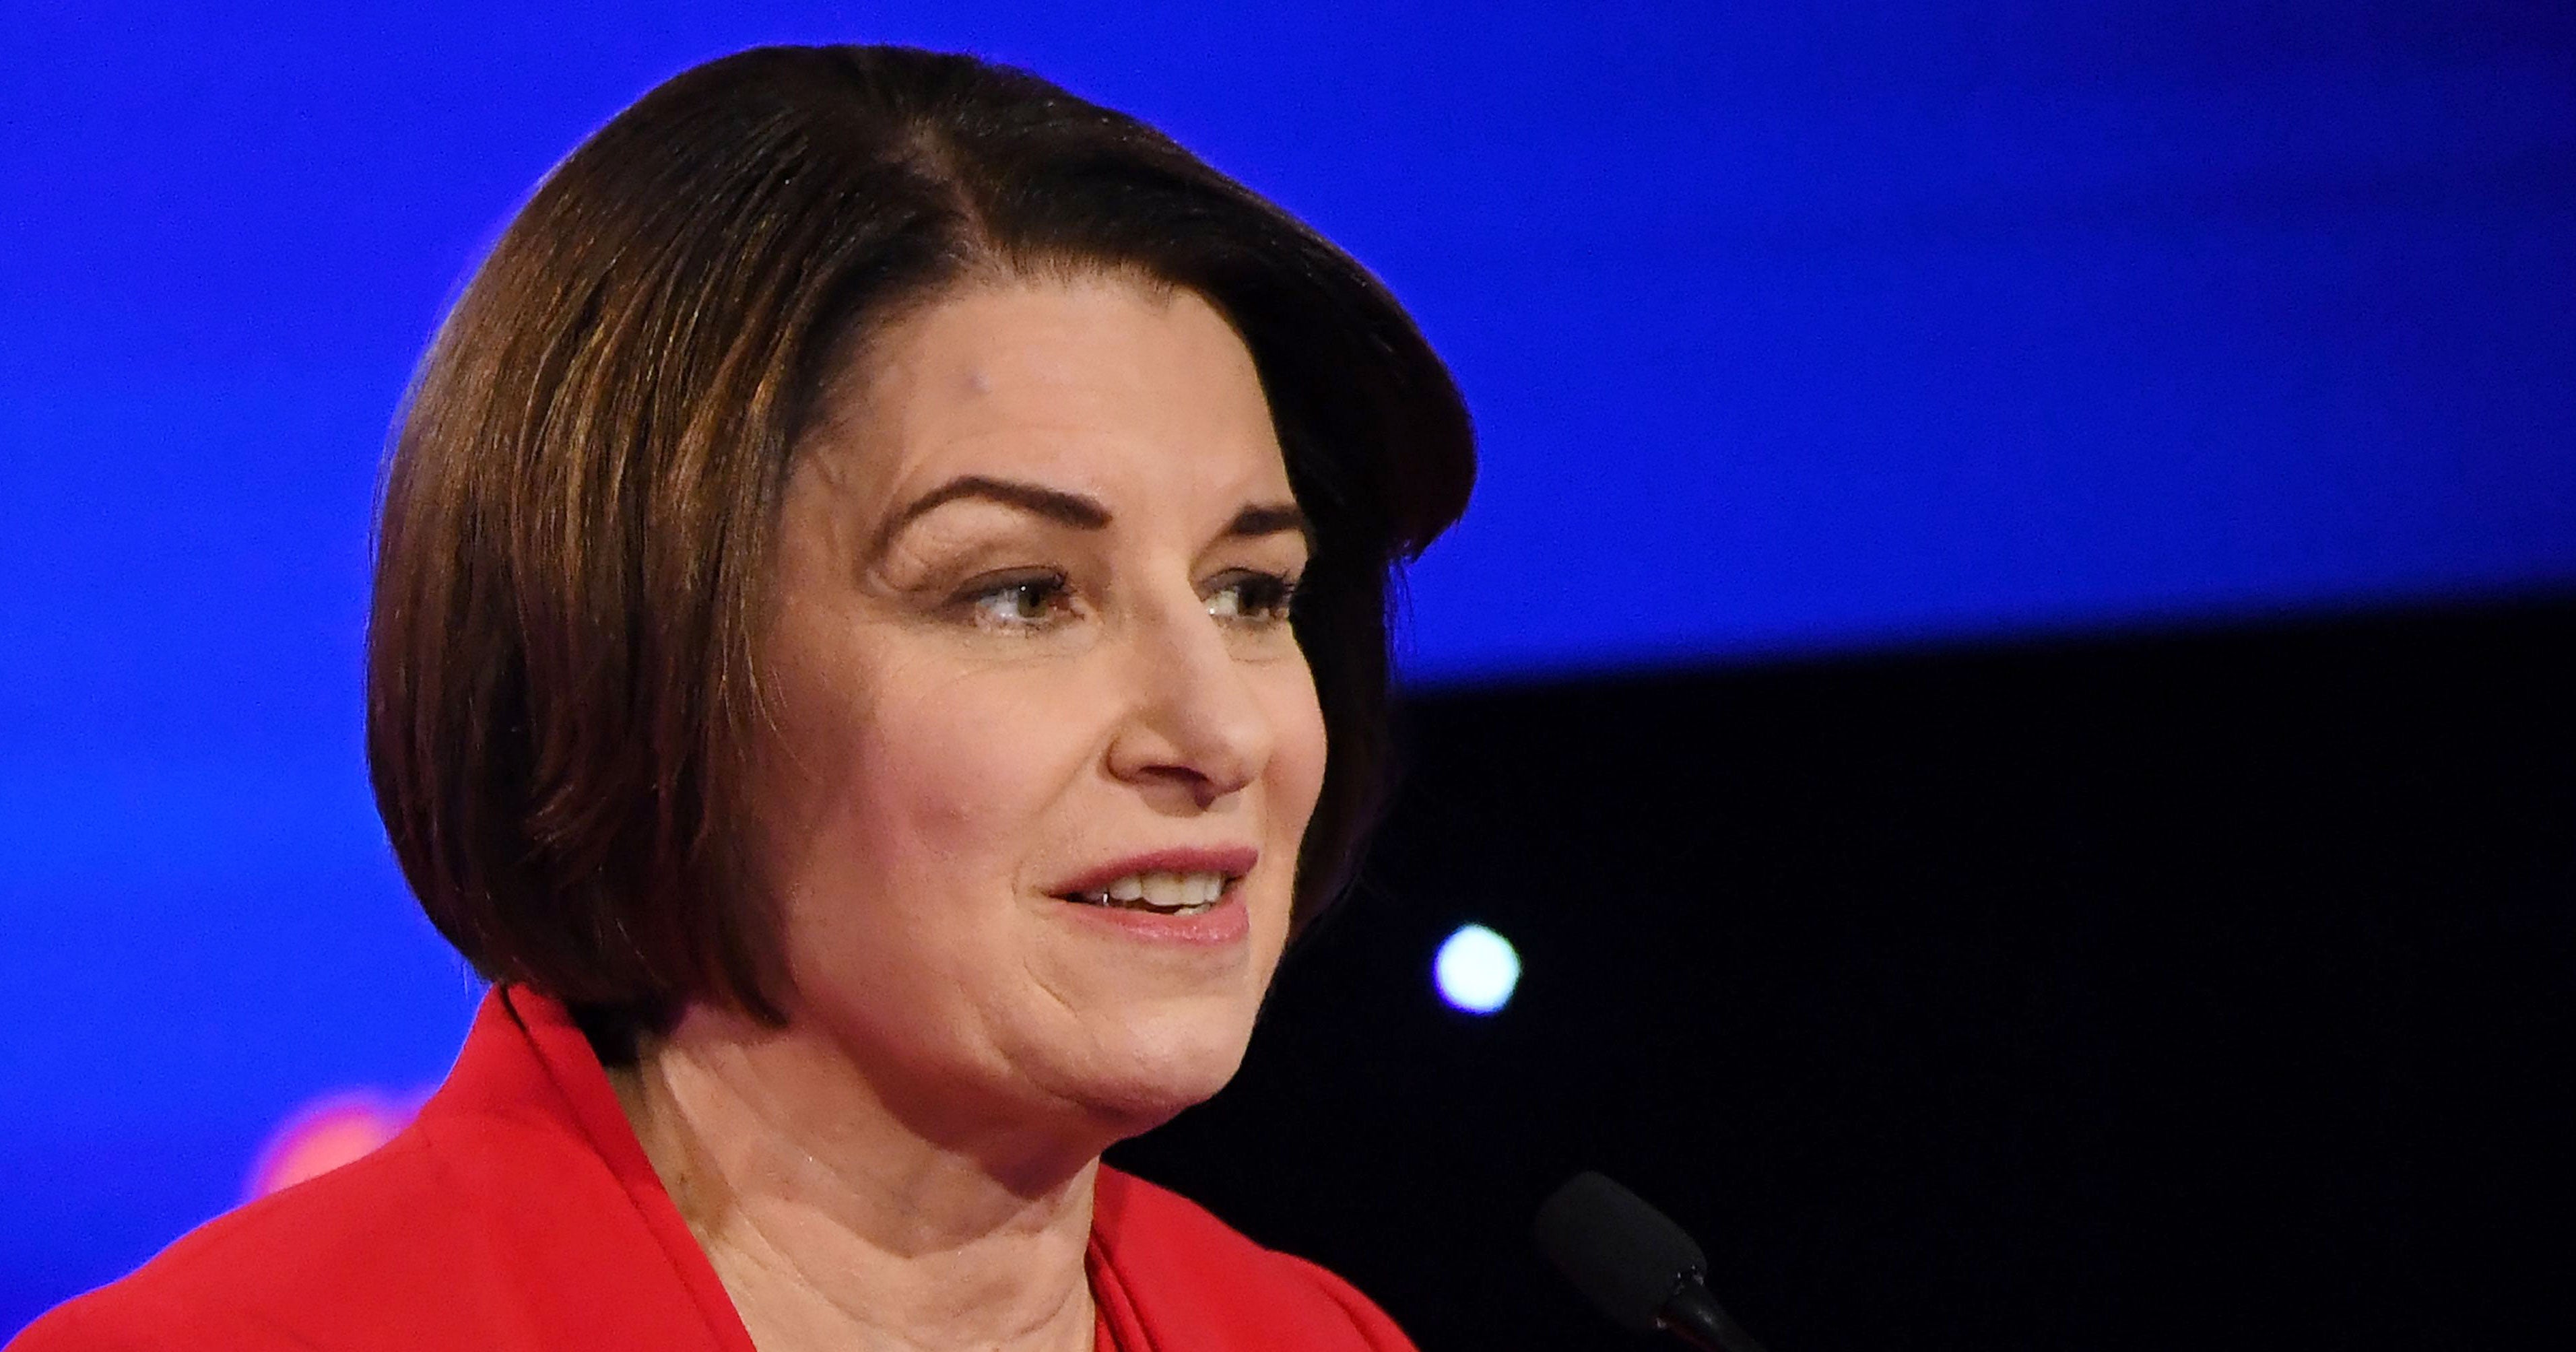 Why Is Everyone Talking About Amy Klobuchar’s Eyebrows & Not Her Po...